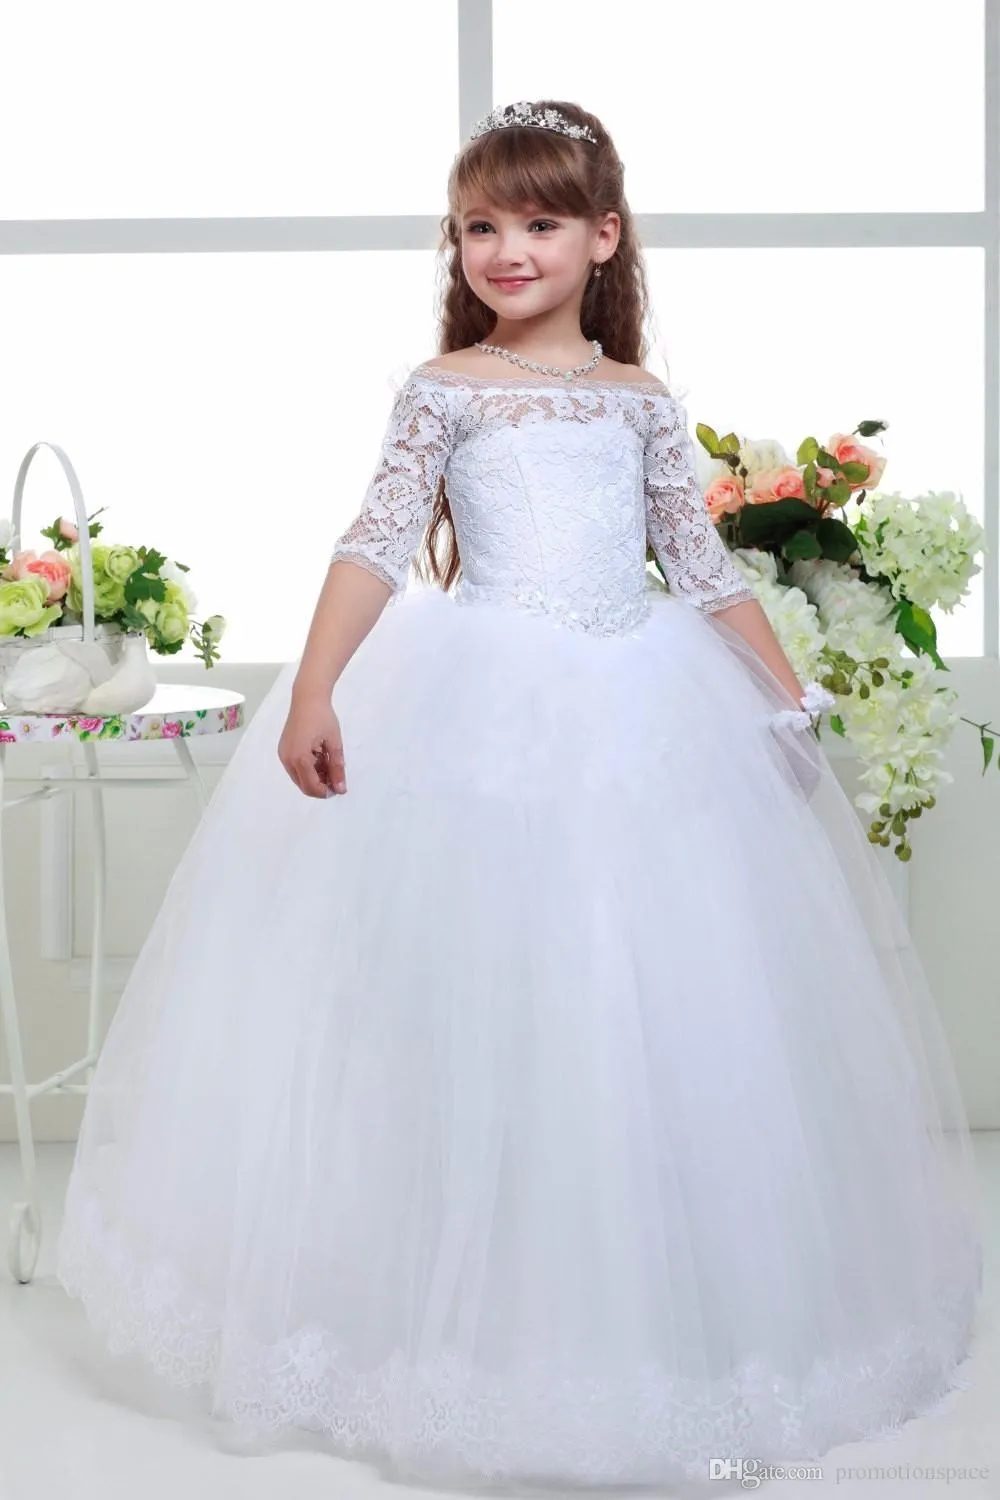 Beautiful White Beaded Tulle Flower Girl Dresses Sleeveless Jewel Open Back With Bow Floor Length Lovely Princess Girls Pageant Gown